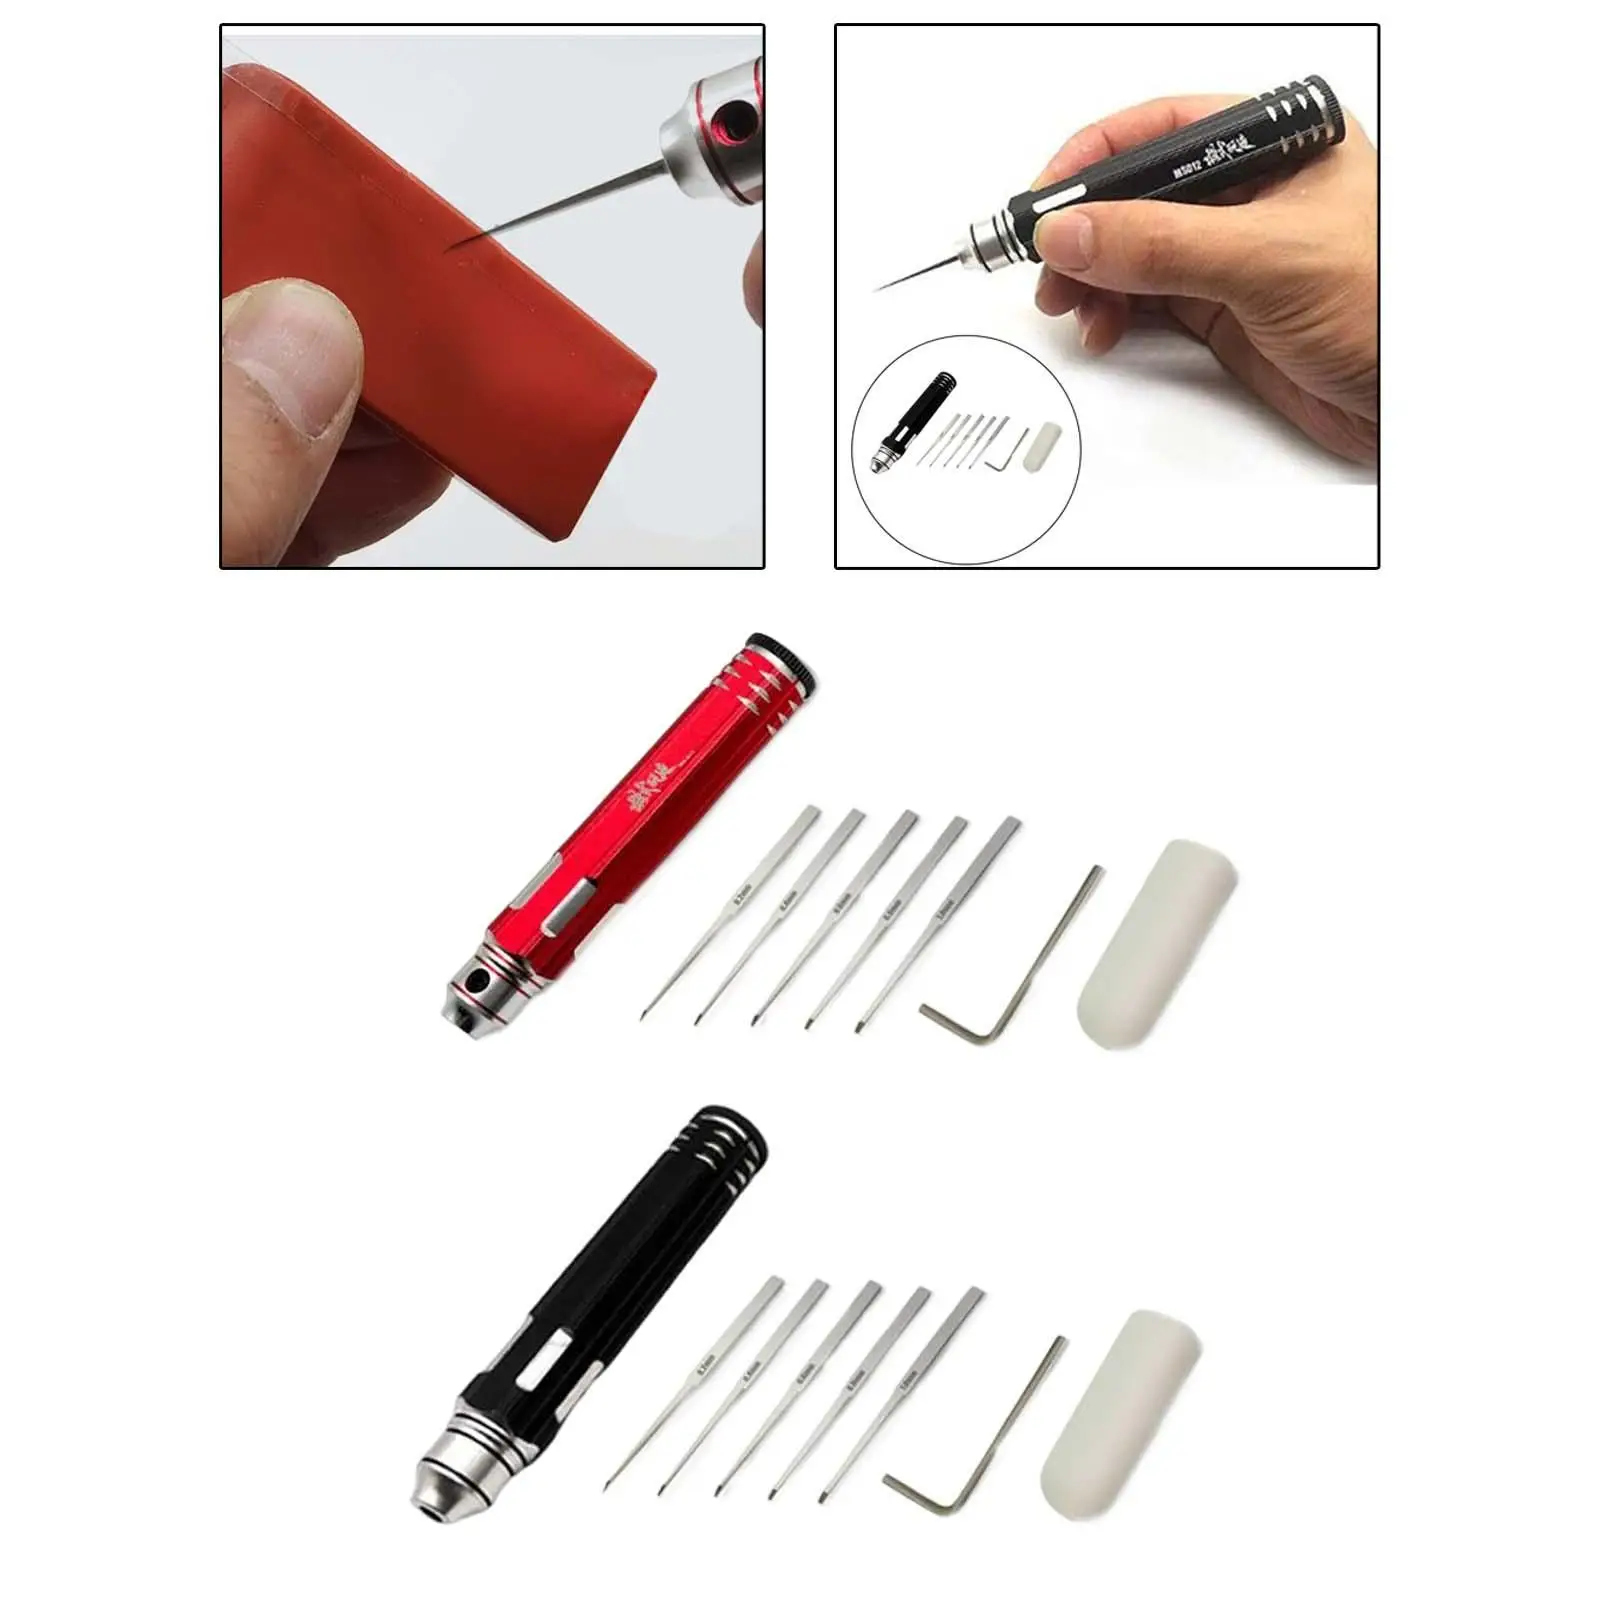 Model Scriber with Blade Model Cutting Tools Resin Carved Scribe Scribe Line Tool Modeling Tools Accessory for Hobby Fixing